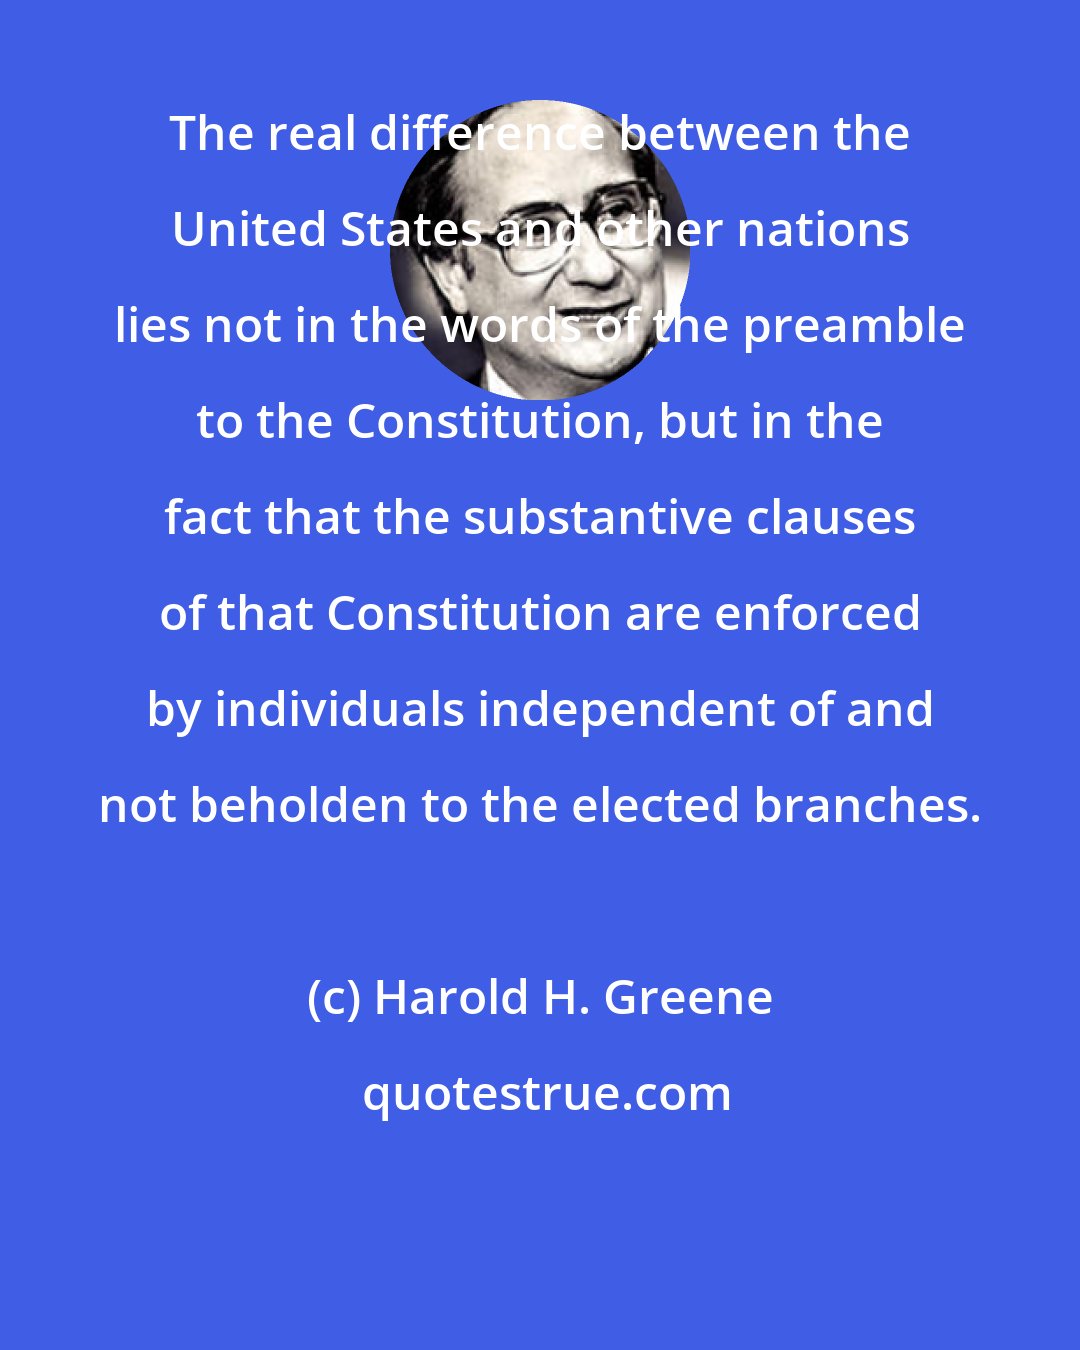 Harold H. Greene: The real difference between the United States and other nations lies not in the words of the preamble to the Constitution, but in the fact that the substantive clauses of that Constitution are enforced by individuals independent of and not beholden to the elected branches.